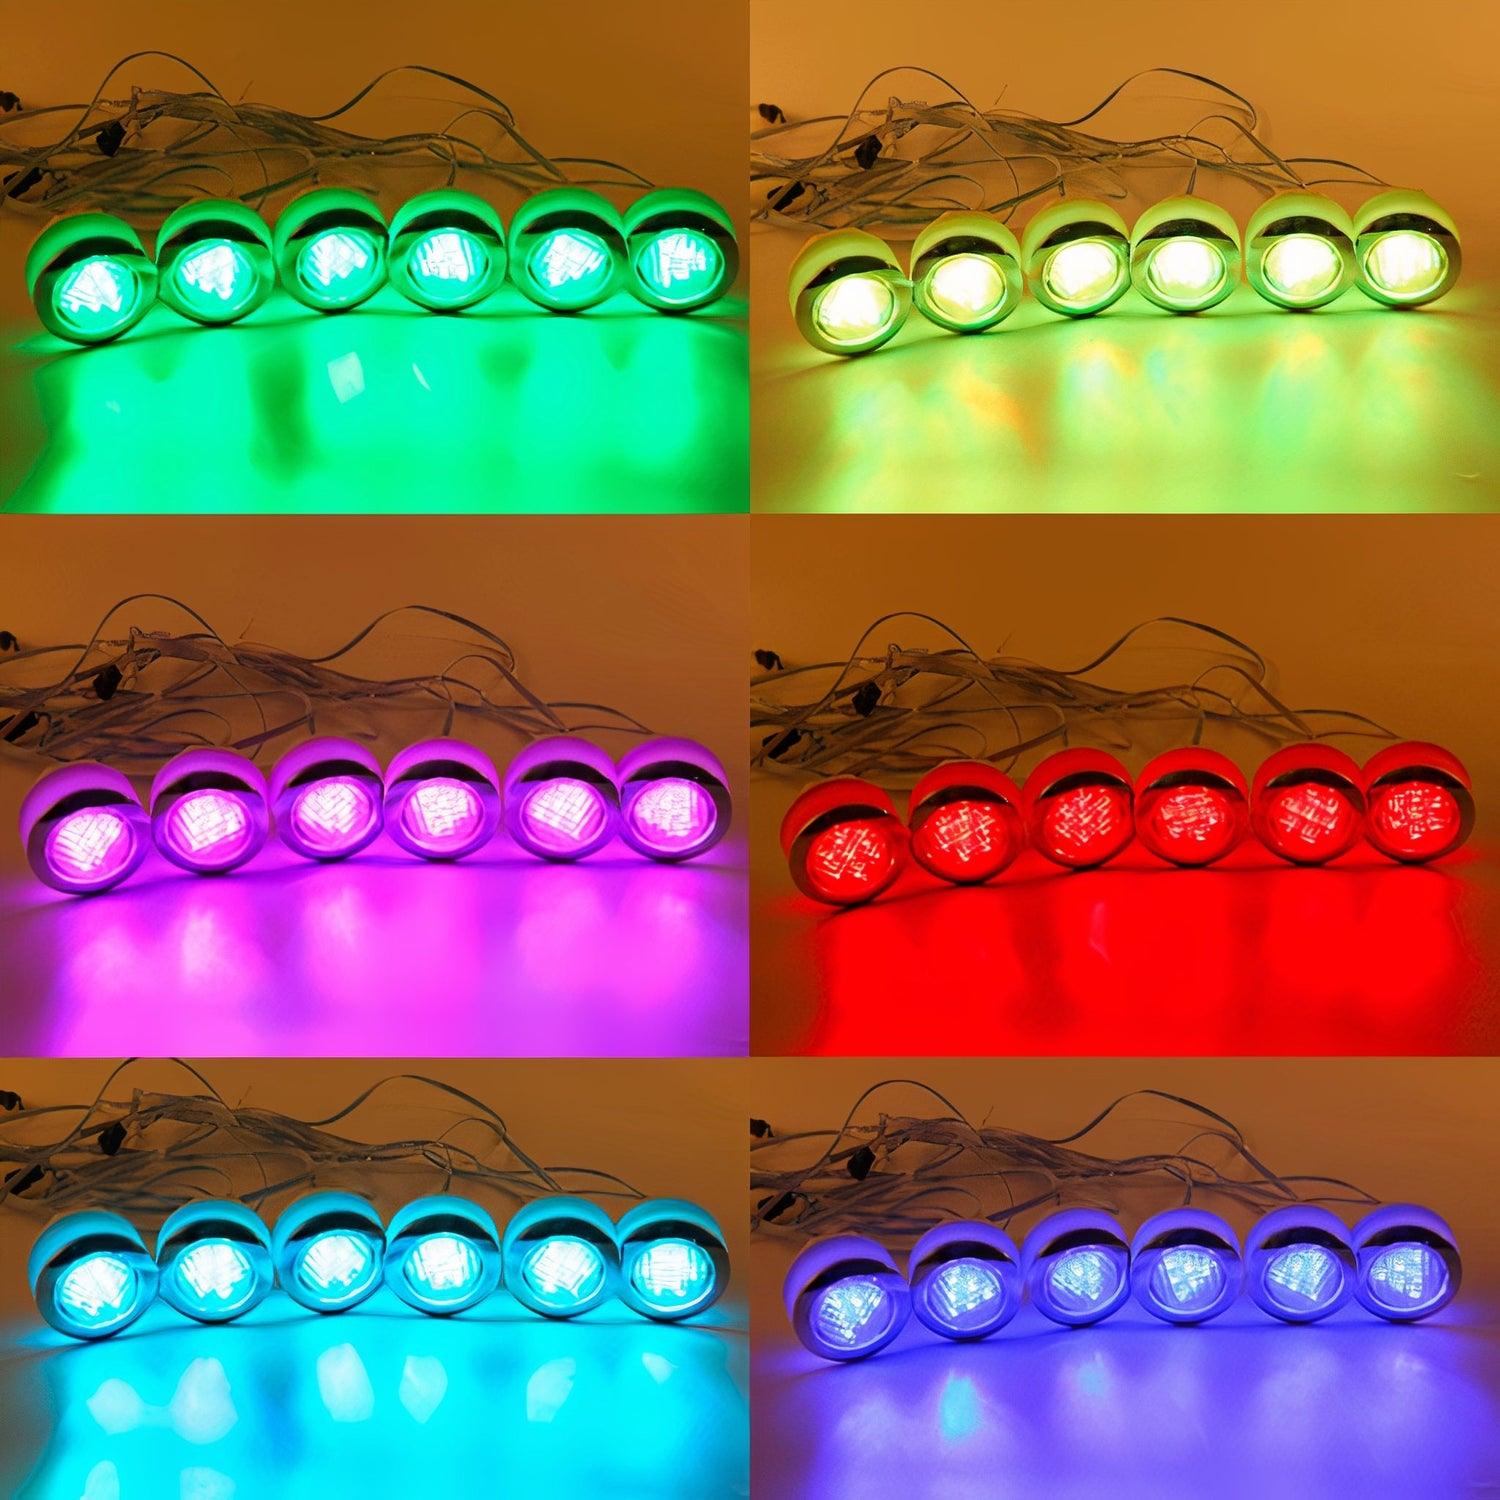 An example to show 6 different colours with the chromotherapy bathroom waterproof lights